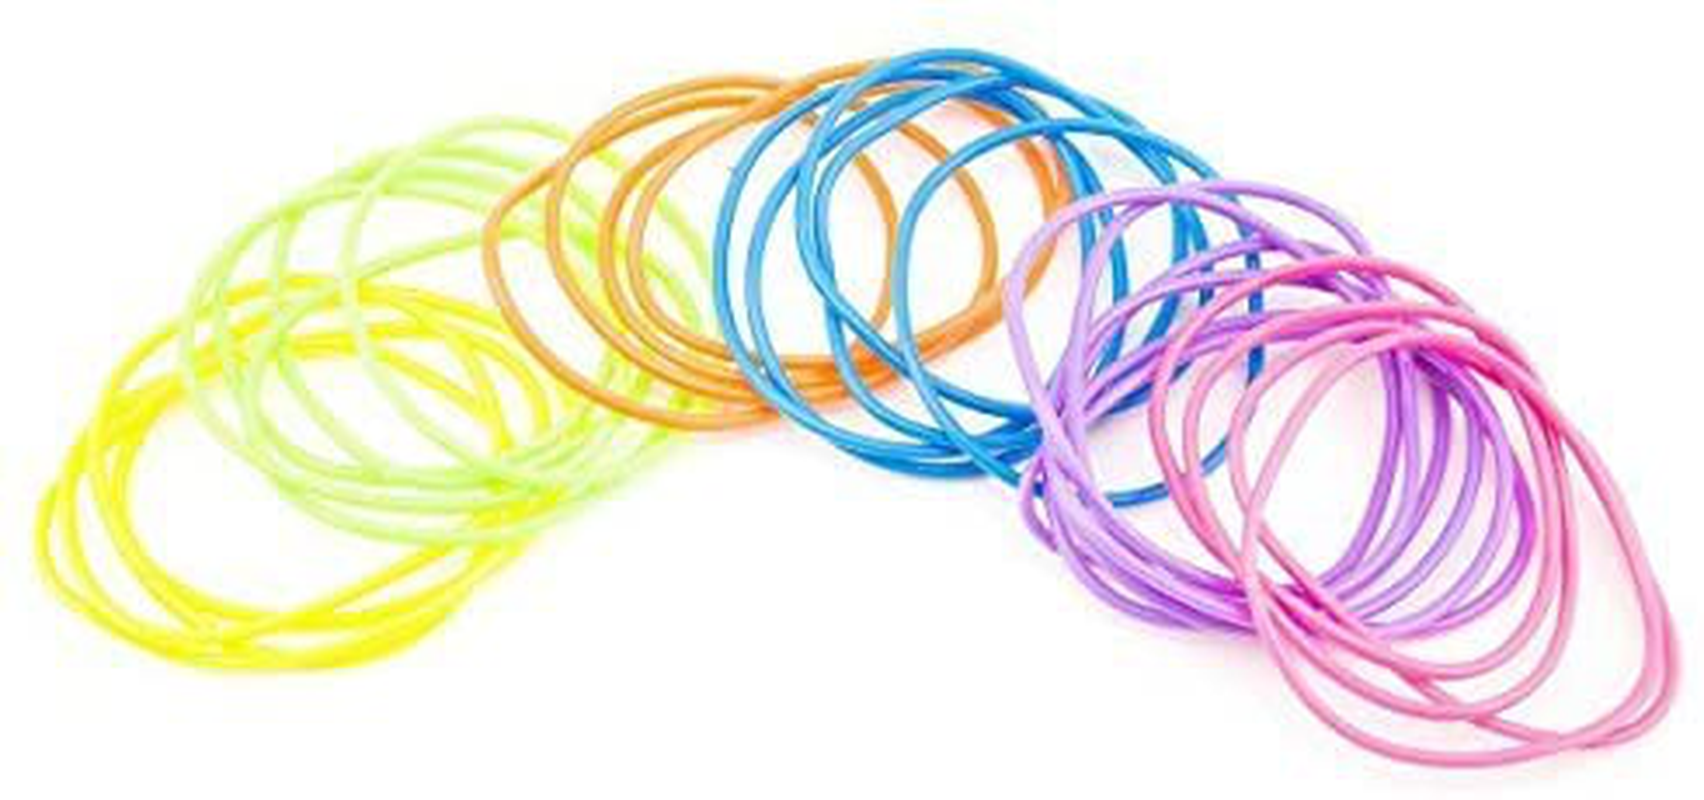 Tytroy Neon Rainbow Assorted Color Jelly Bracelets Birthday Party Favors Gifts - 144 Piece - (144)